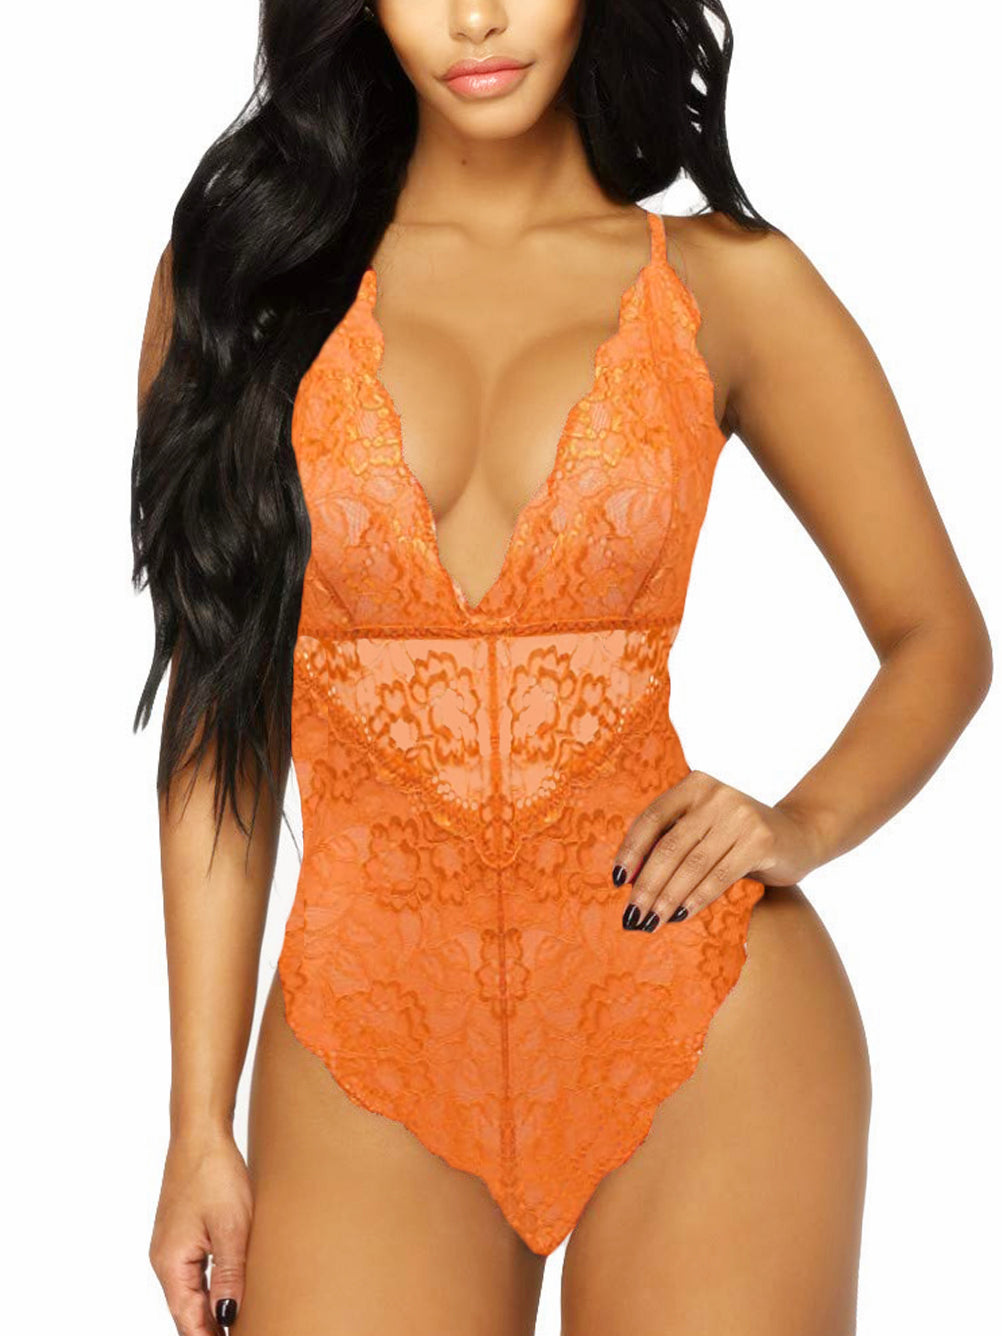 Kaei&Shi V-Neck See Through Lingerie Floral Lace Babydoll Sexy Lingerie for Women Bodysuit